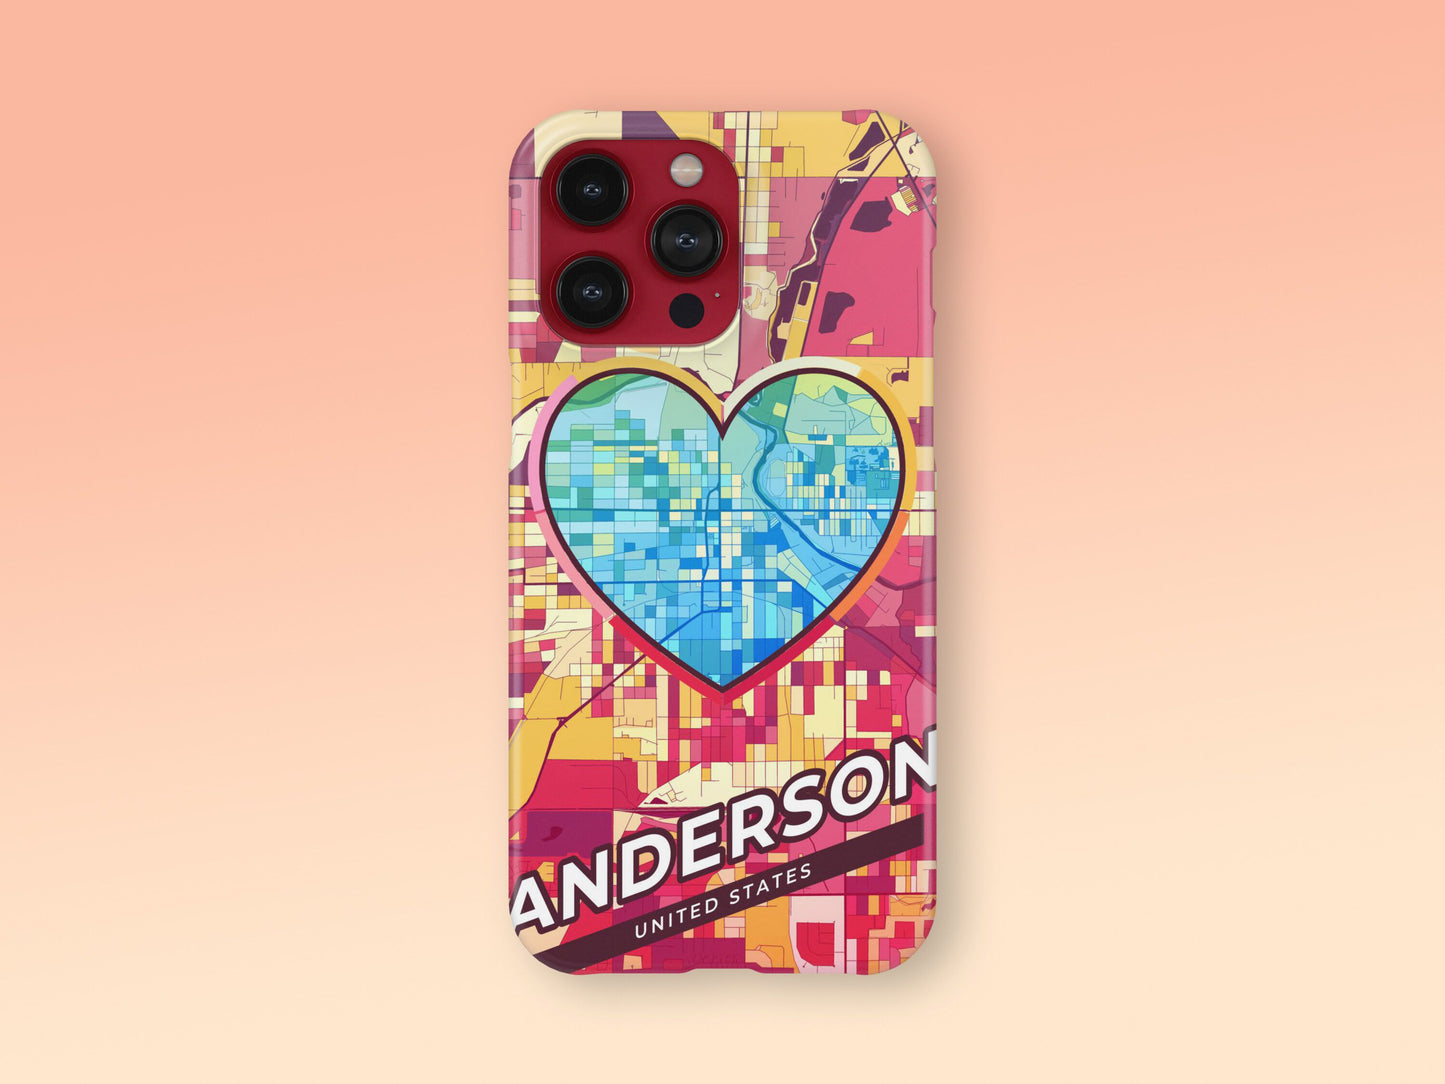 Anderson Indiana slim phone case with colorful icon. Birthday, wedding or housewarming gift. Couple match cases. 2